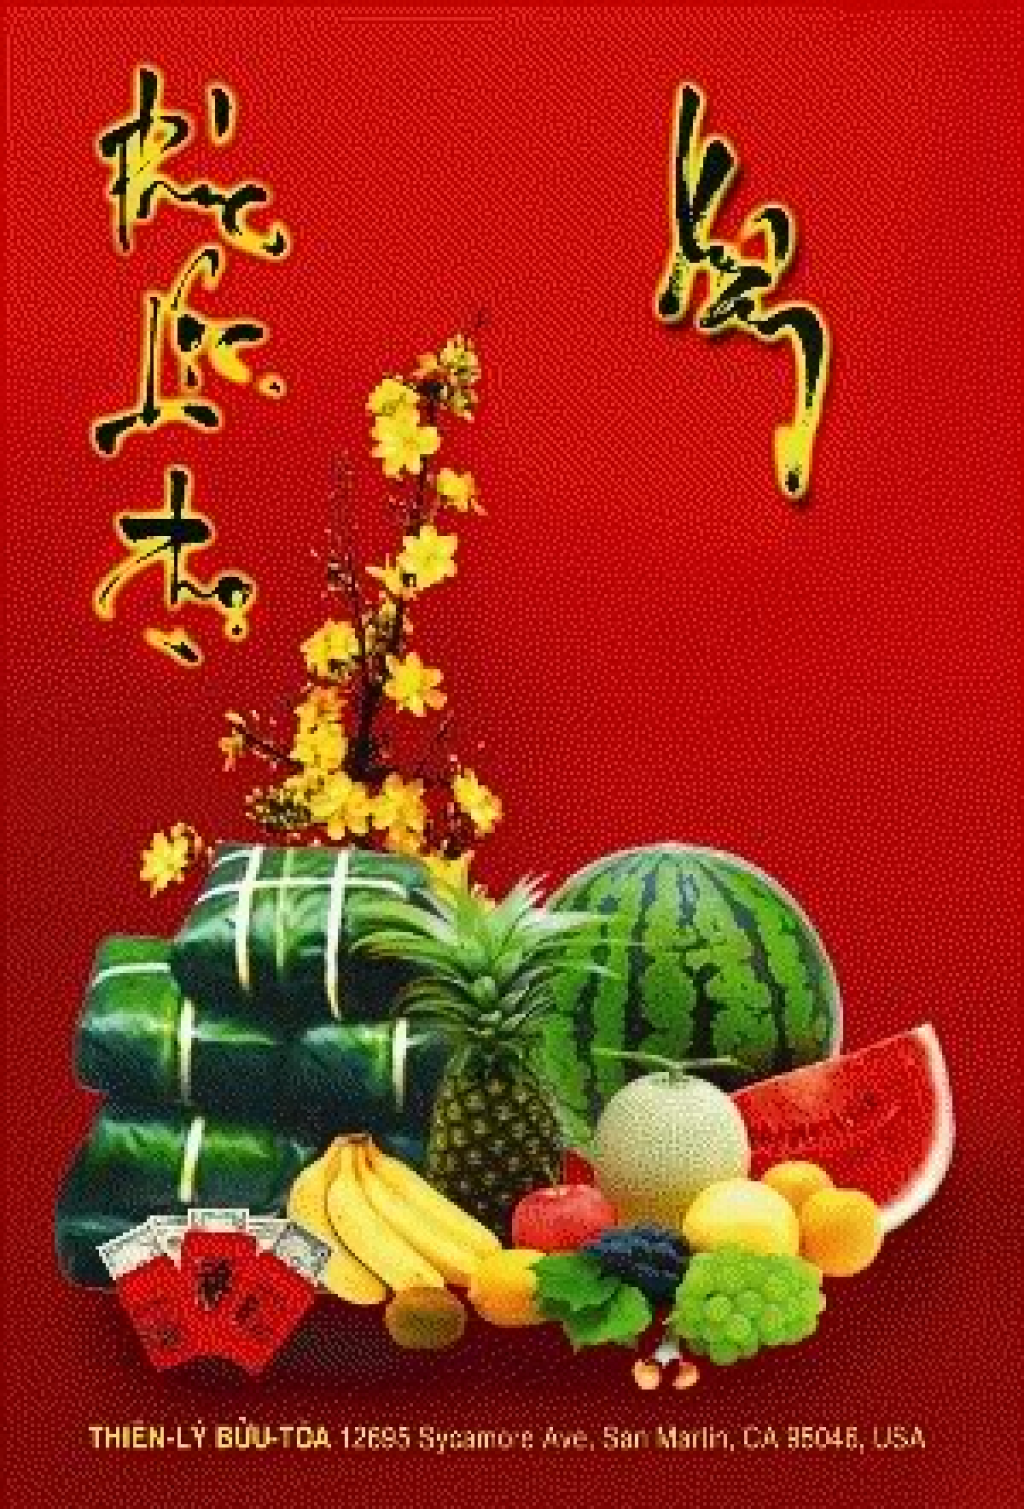 Translation:
As the year of the Ox is approaching, it\'s time for you to start looking for a special Tet wallpaper for your iPhone. With increasingly advanced technology, the Tet wallpaper for iPhone 2024 will bring you extremely realistic images with high resolution. Let\'s experience the creative, lively and meaningful screen space of the Tet wallpaper for iPhone 2024.